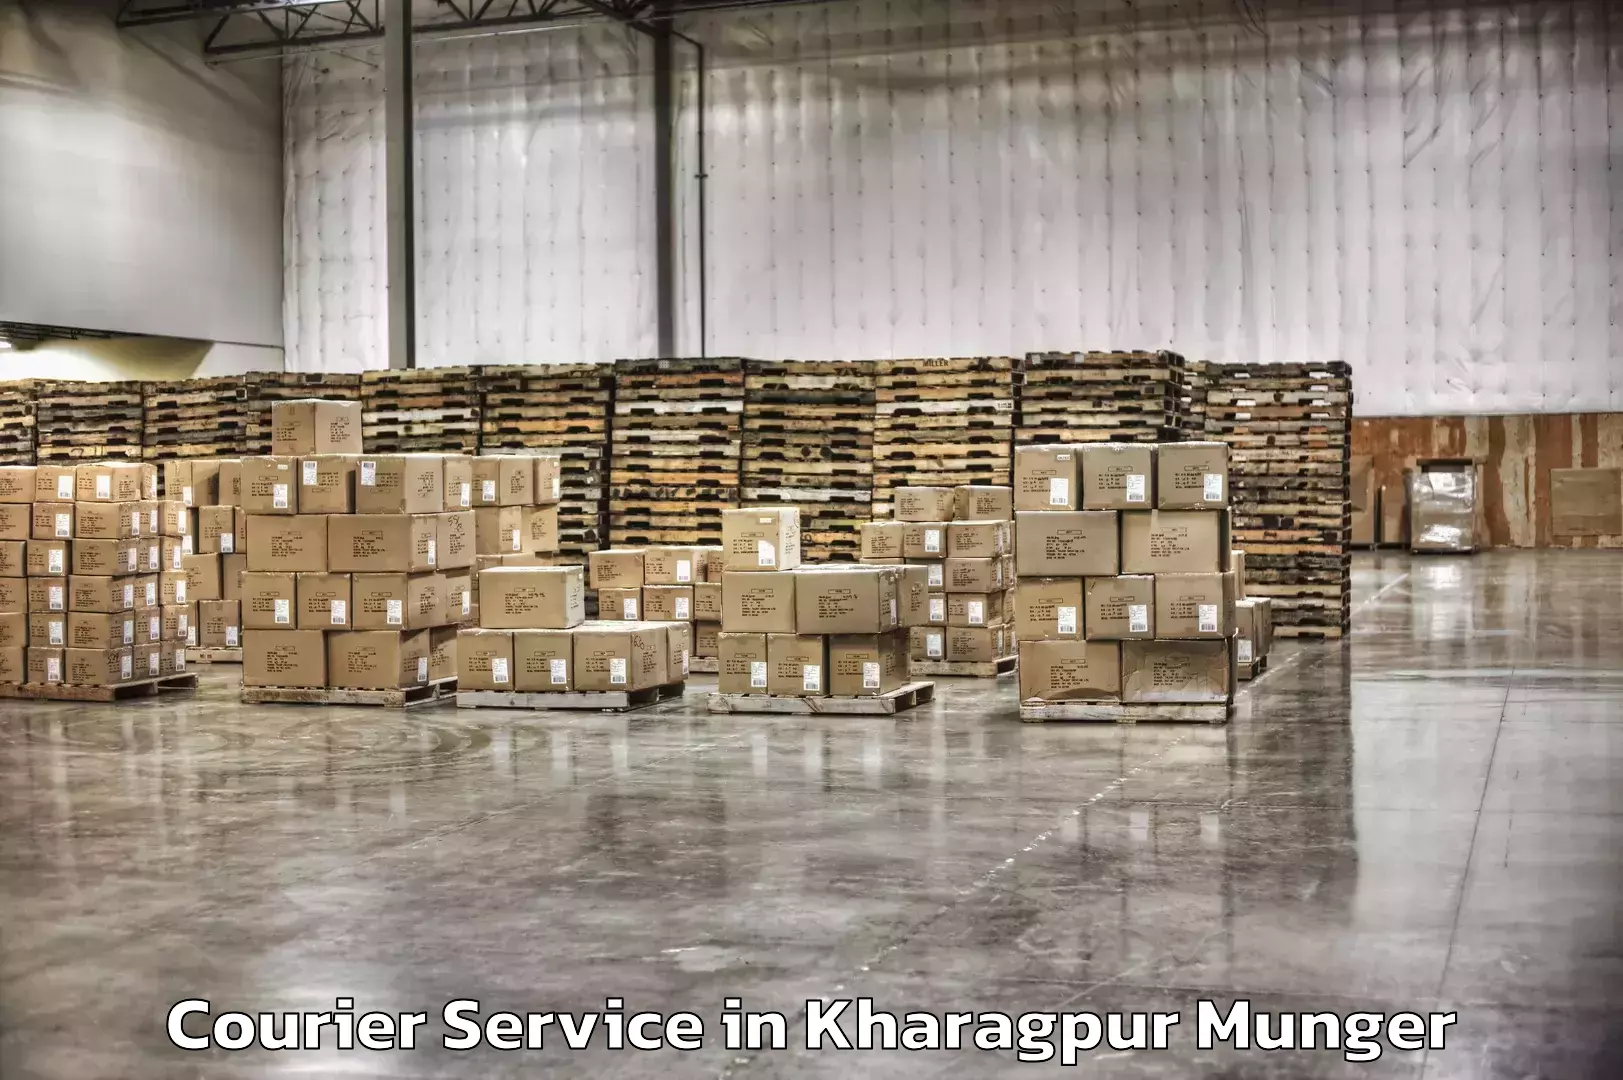 Integrated shipping services in Kharagpur Munger